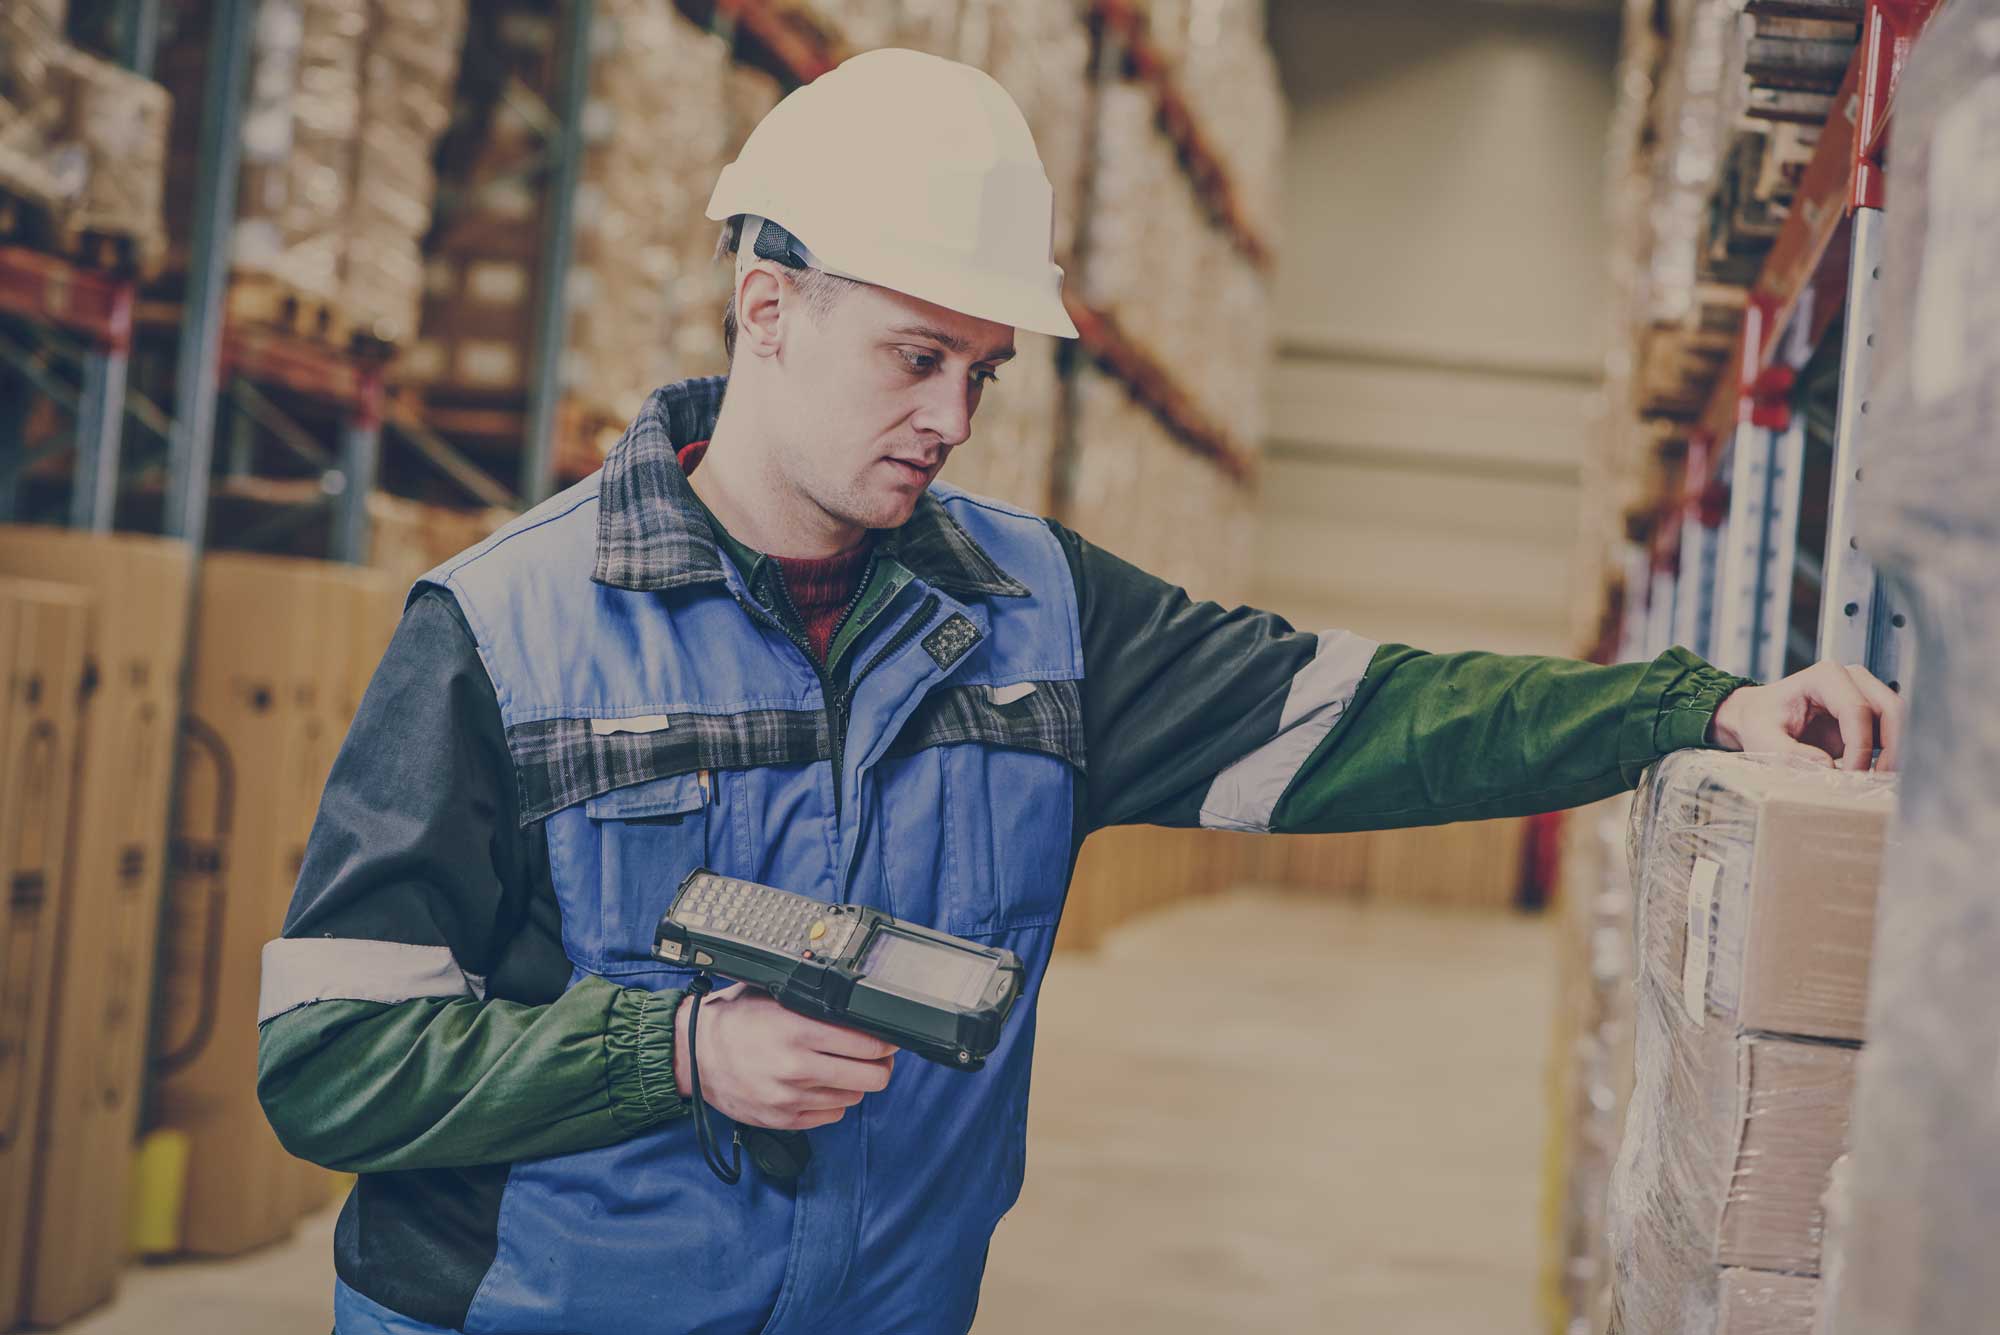 Warehouse worker scanning product on shelf using ERP system